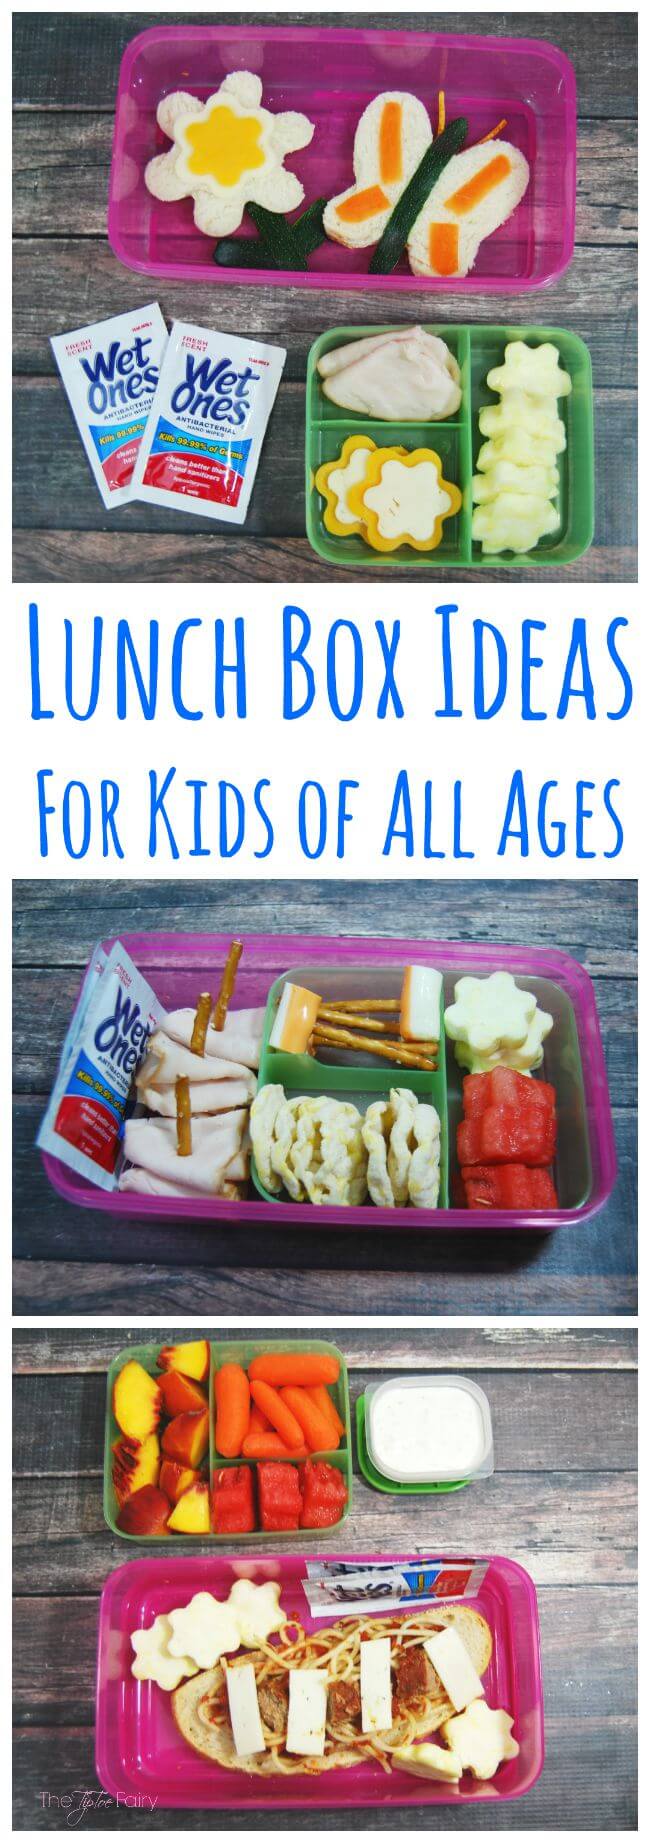 Lunch Box Ideas for Kids of All Ages #WishIHadAWetOnes #ad | The TipToe Fairy